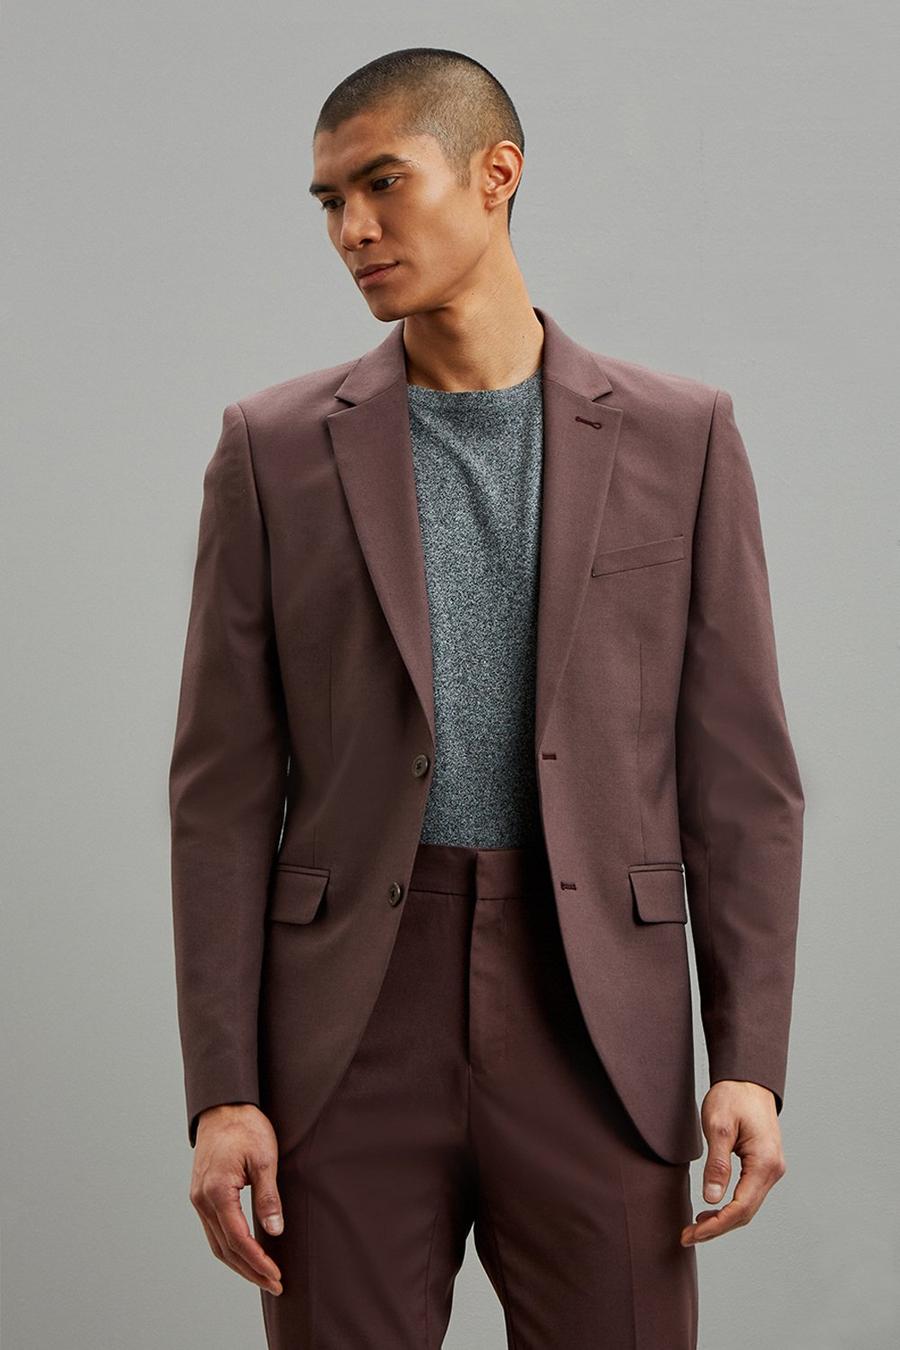 Peppercorn Slim Fit Two-Piece Suit